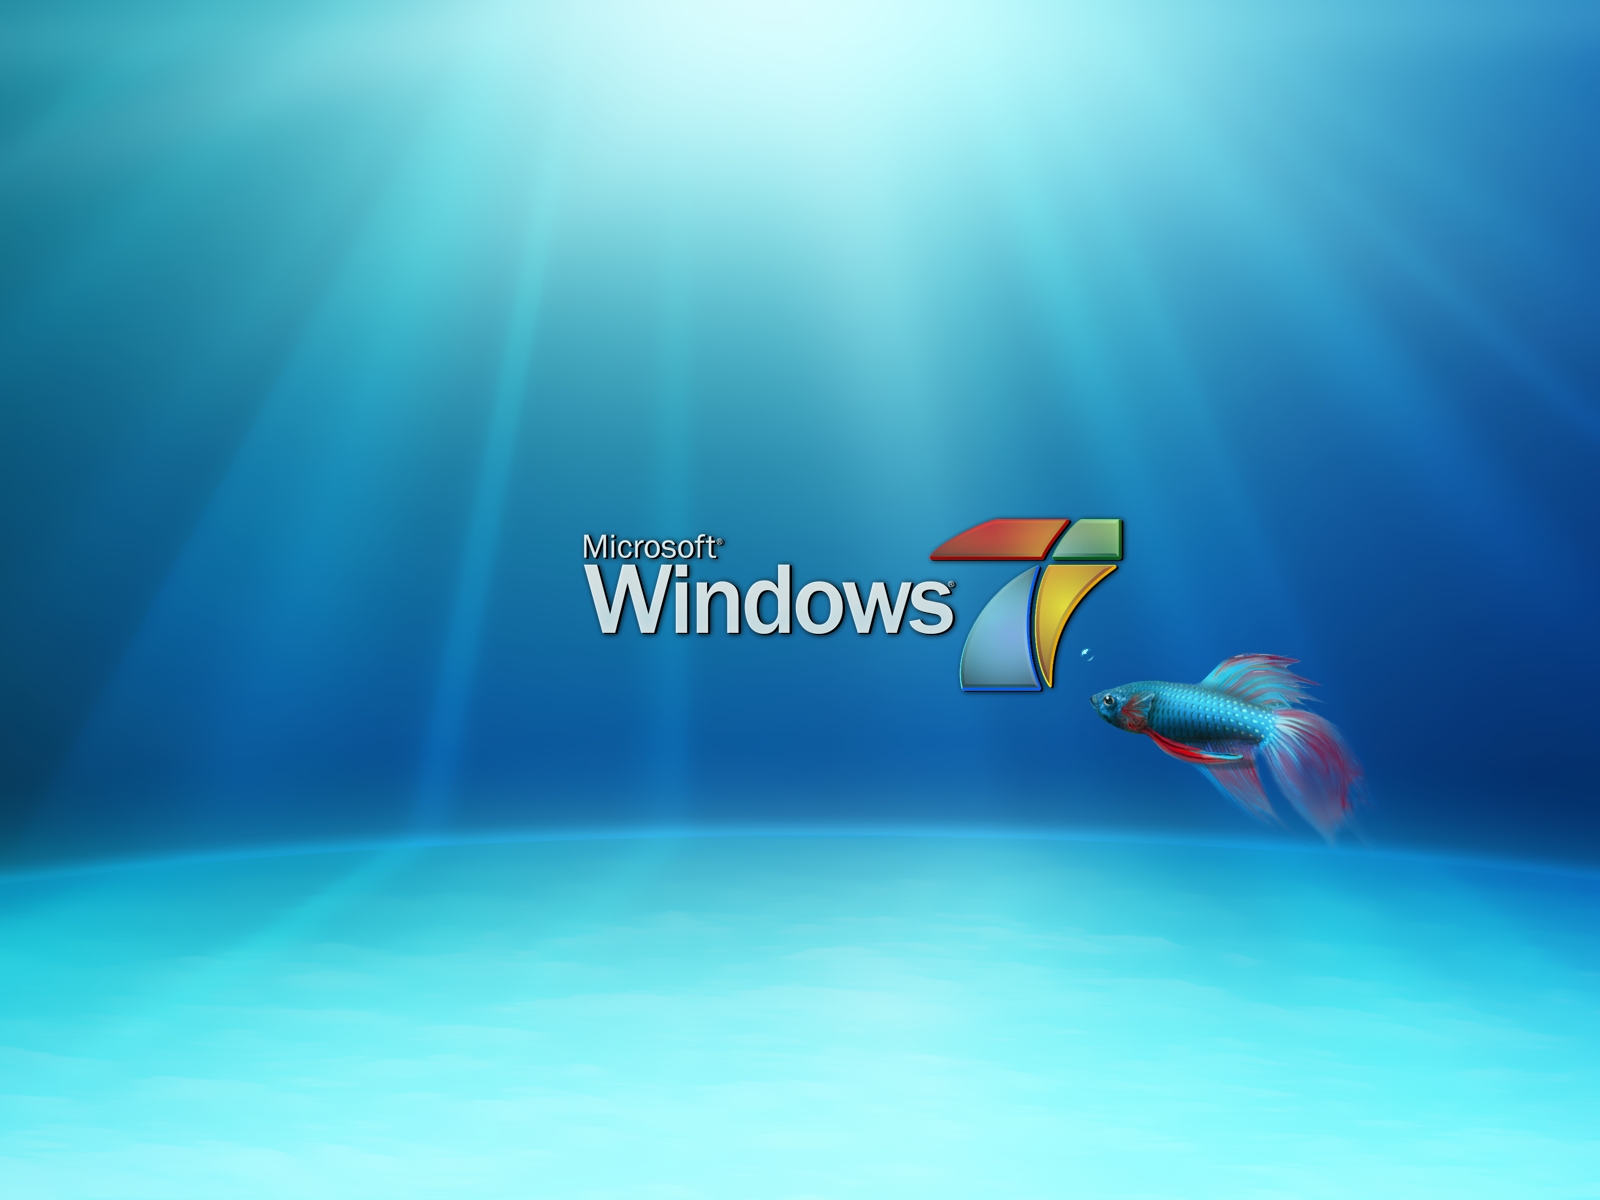 wallpapers windows 7 hd wallpaper wallpapers windows 7 hd wallpapers